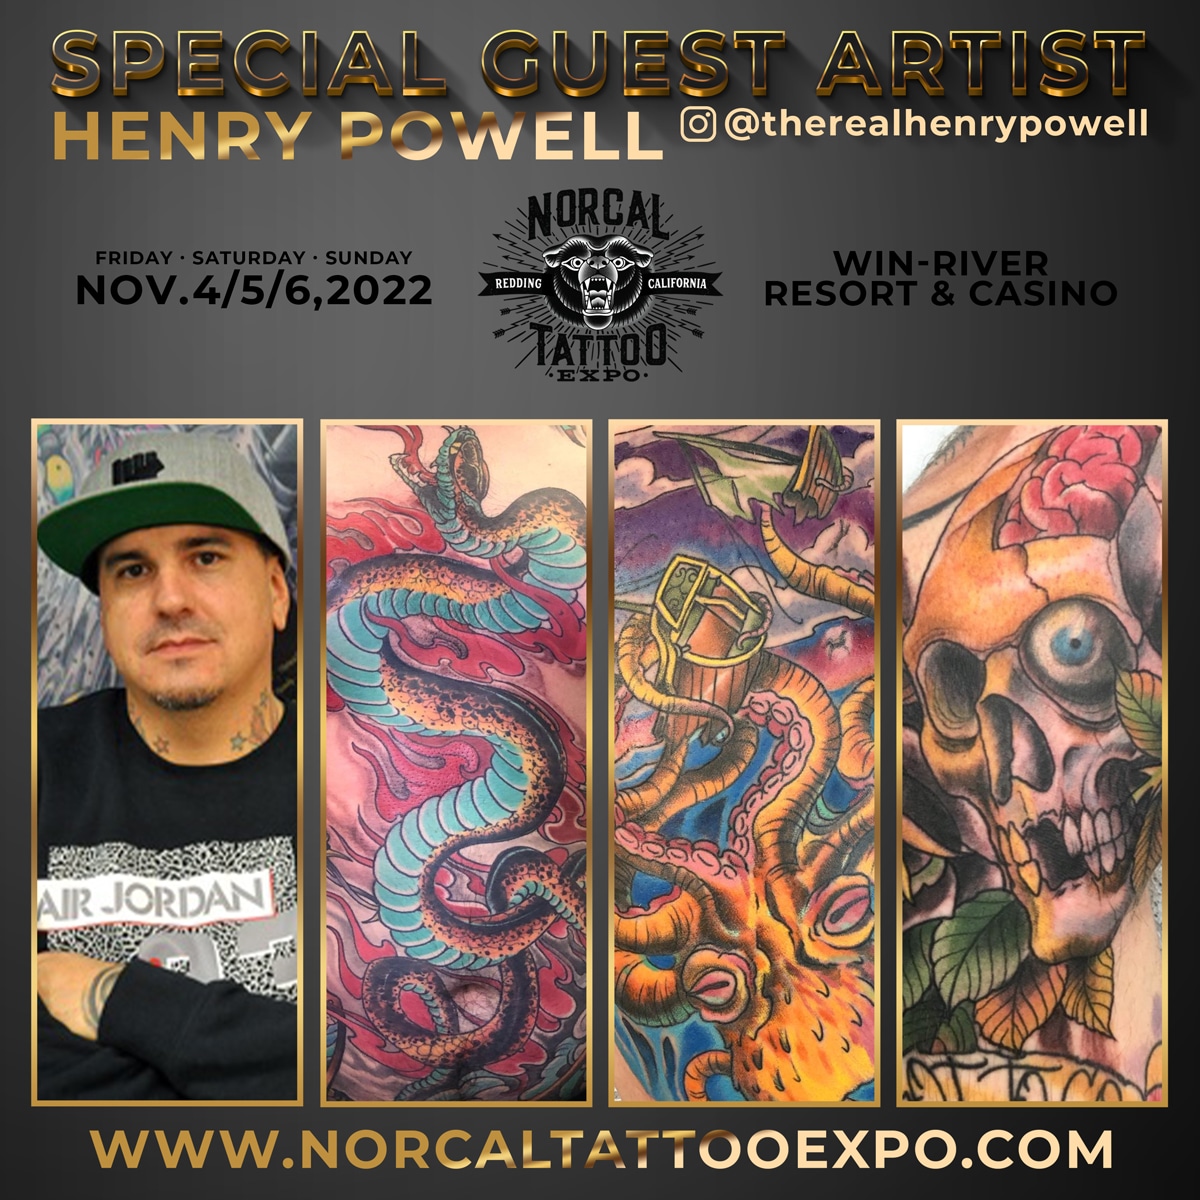 Artists - Norcal Tattoo Expo